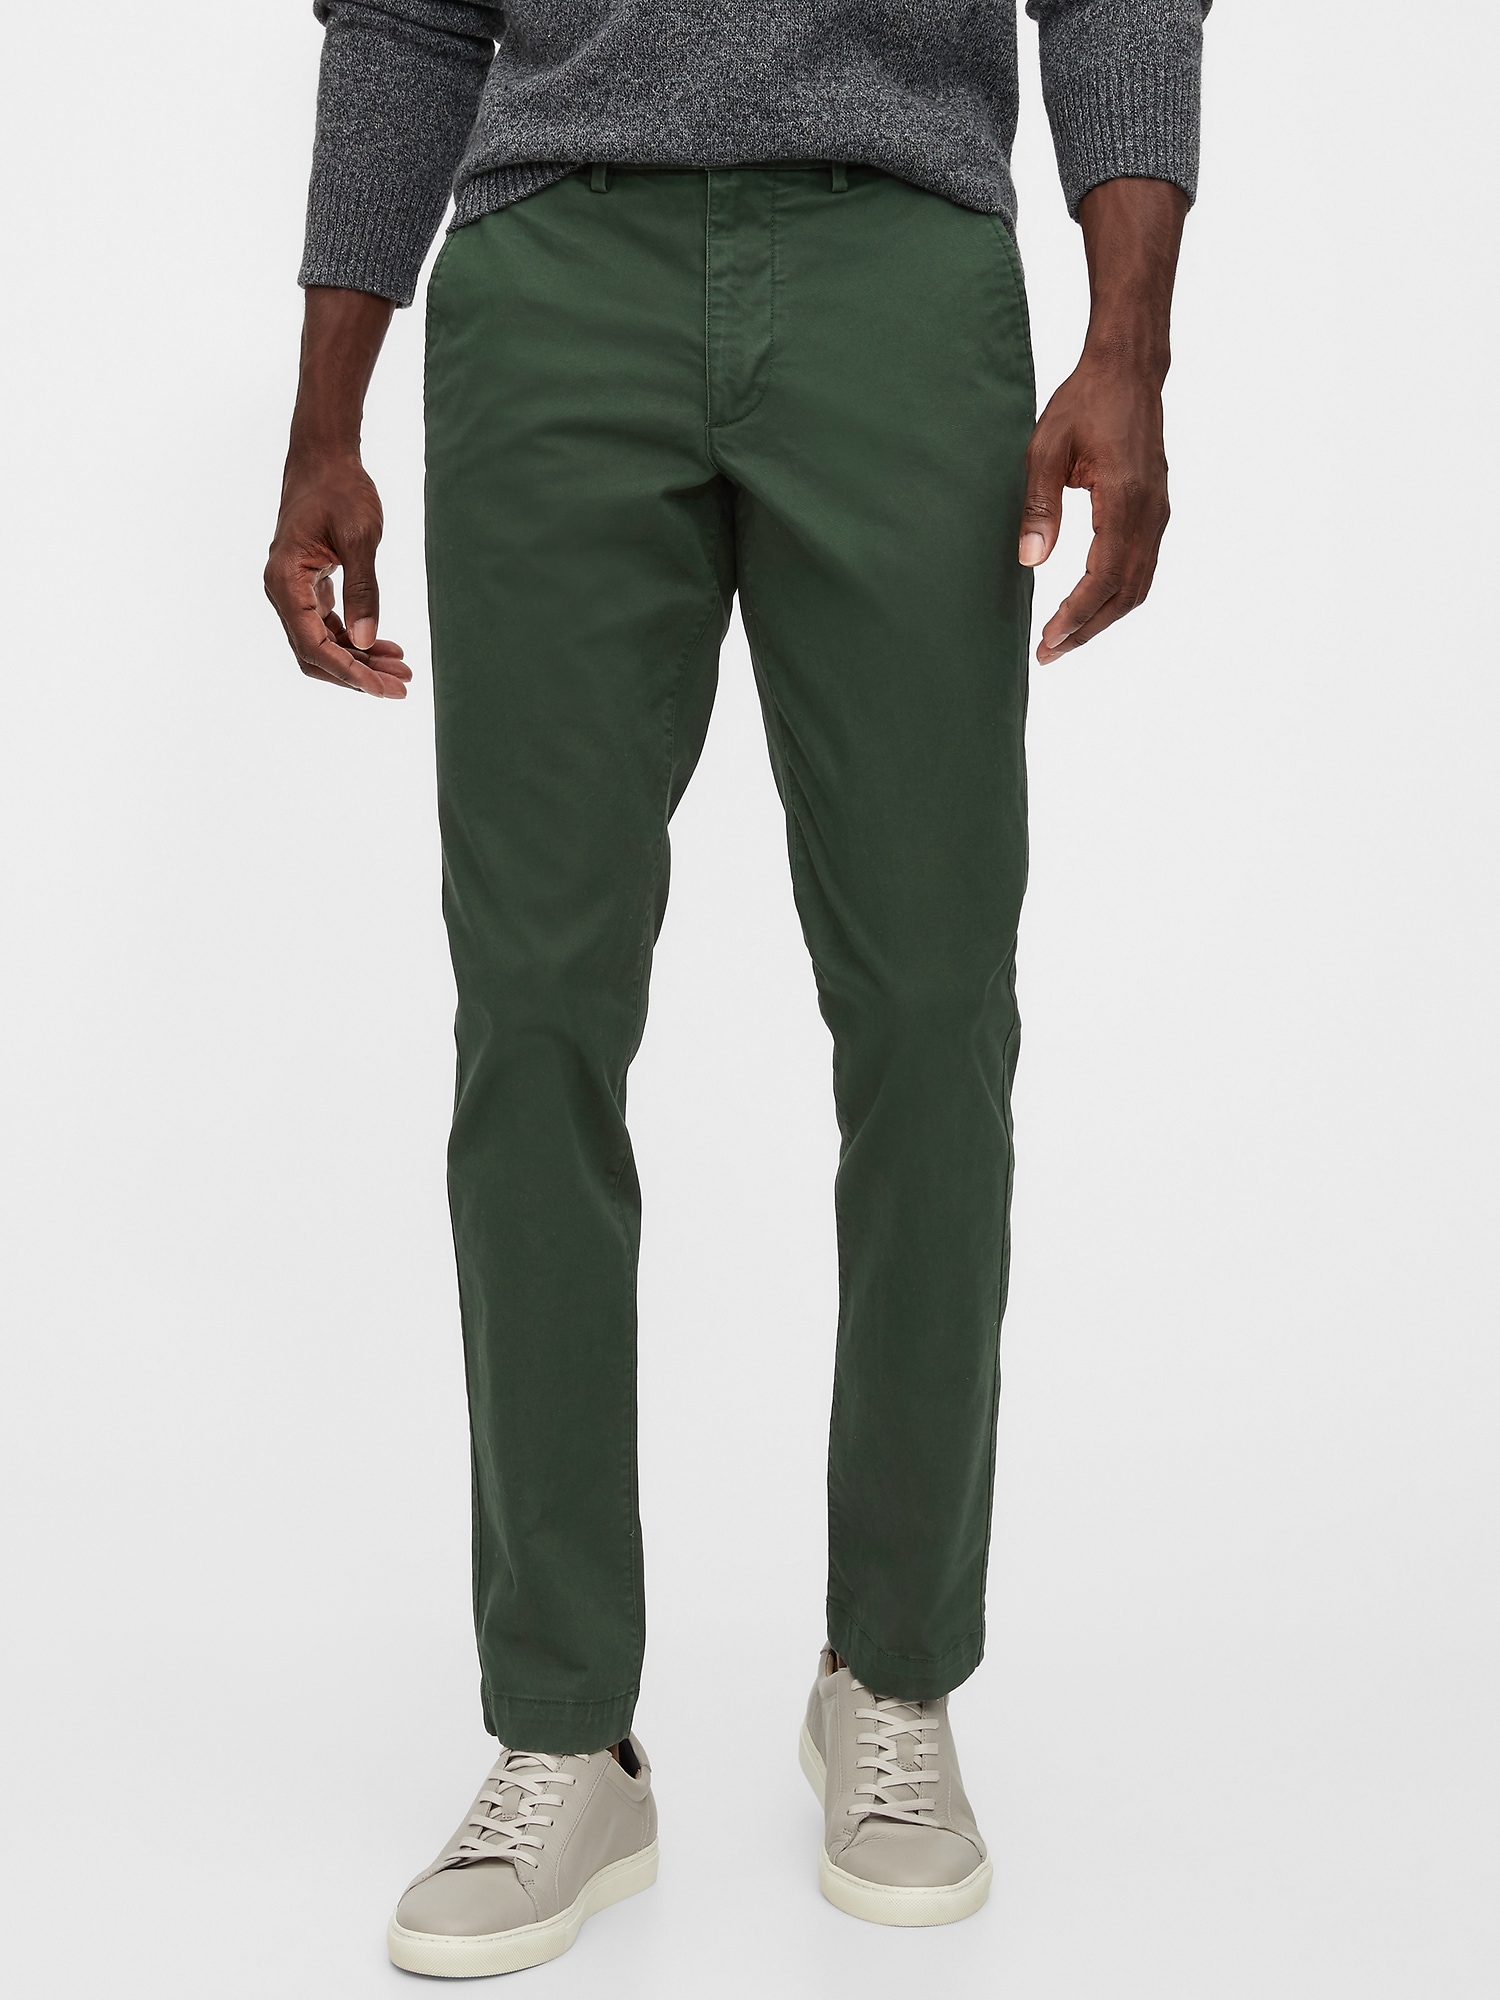 Essential Khakis in Straight Fit with GapFlex | Gap Factory